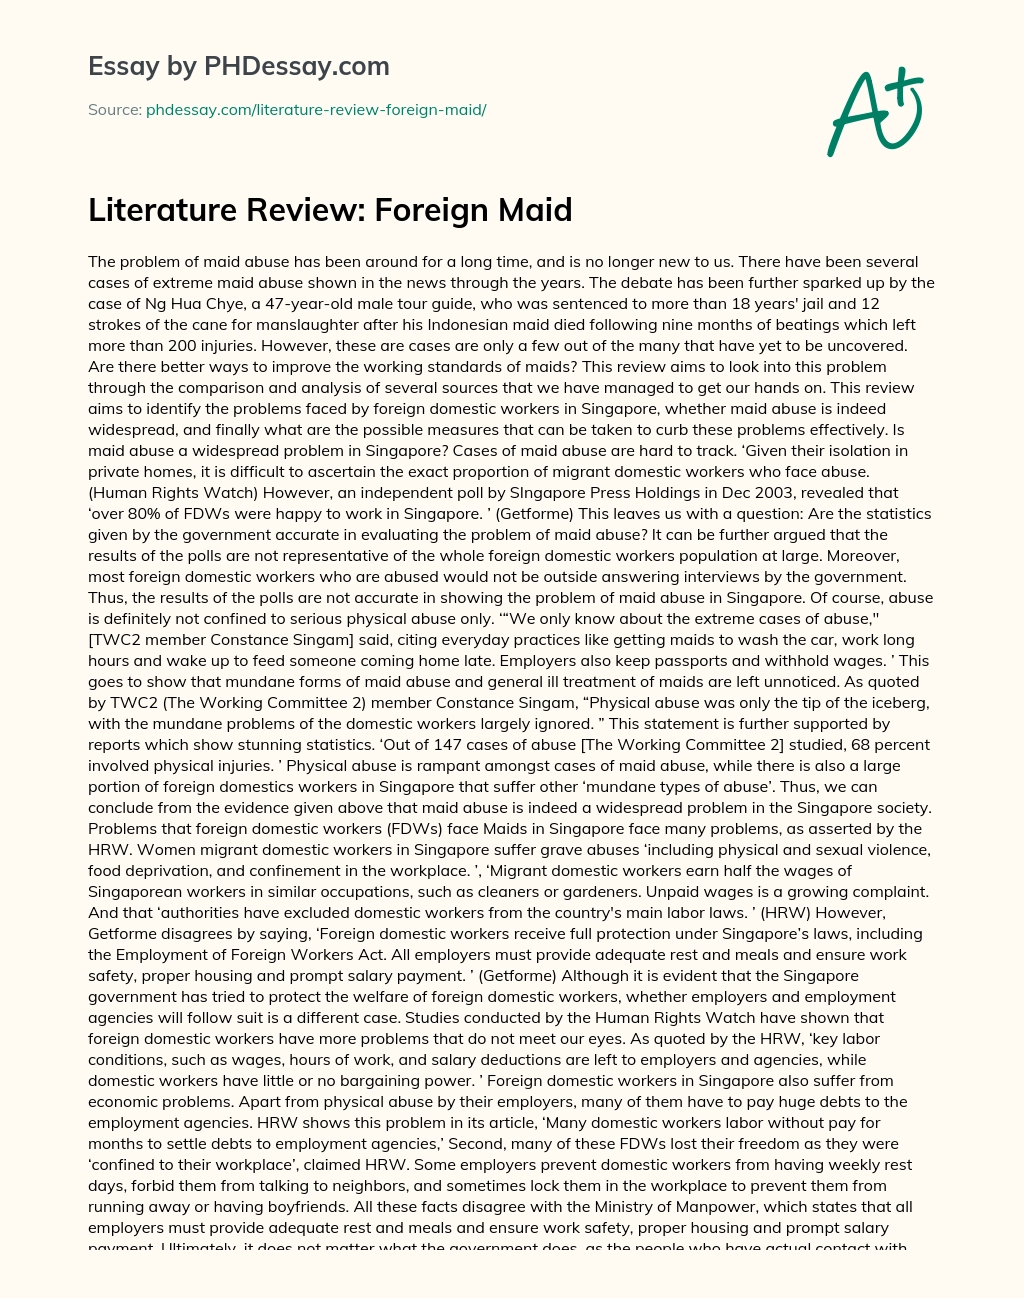 Literature Review: Foreign Maid essay